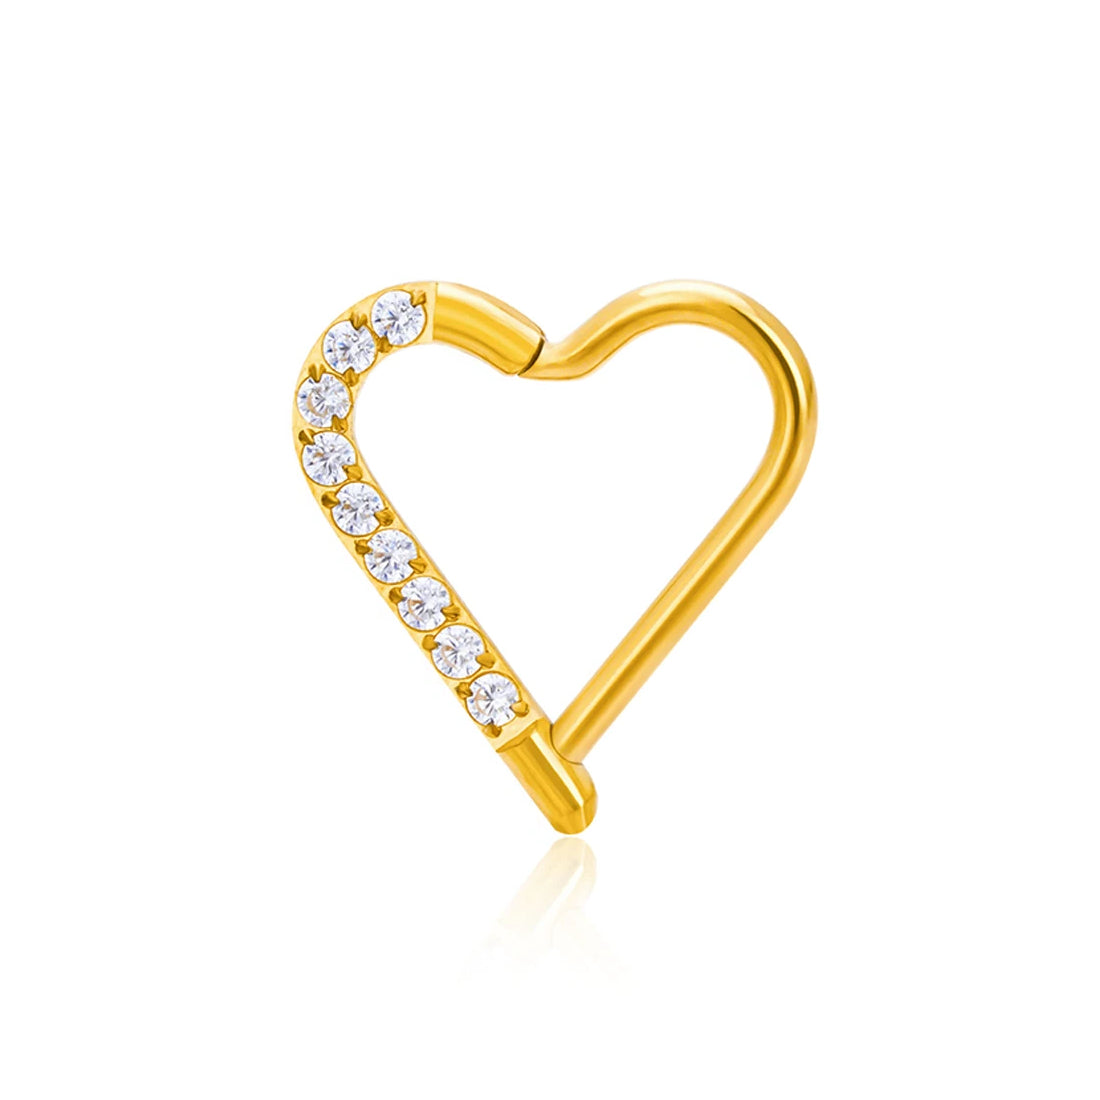 Daith heart piercing gold and silver daith ring titanium 16G with CZ stones hinged segment clicker Ashley Piercing Jewelry